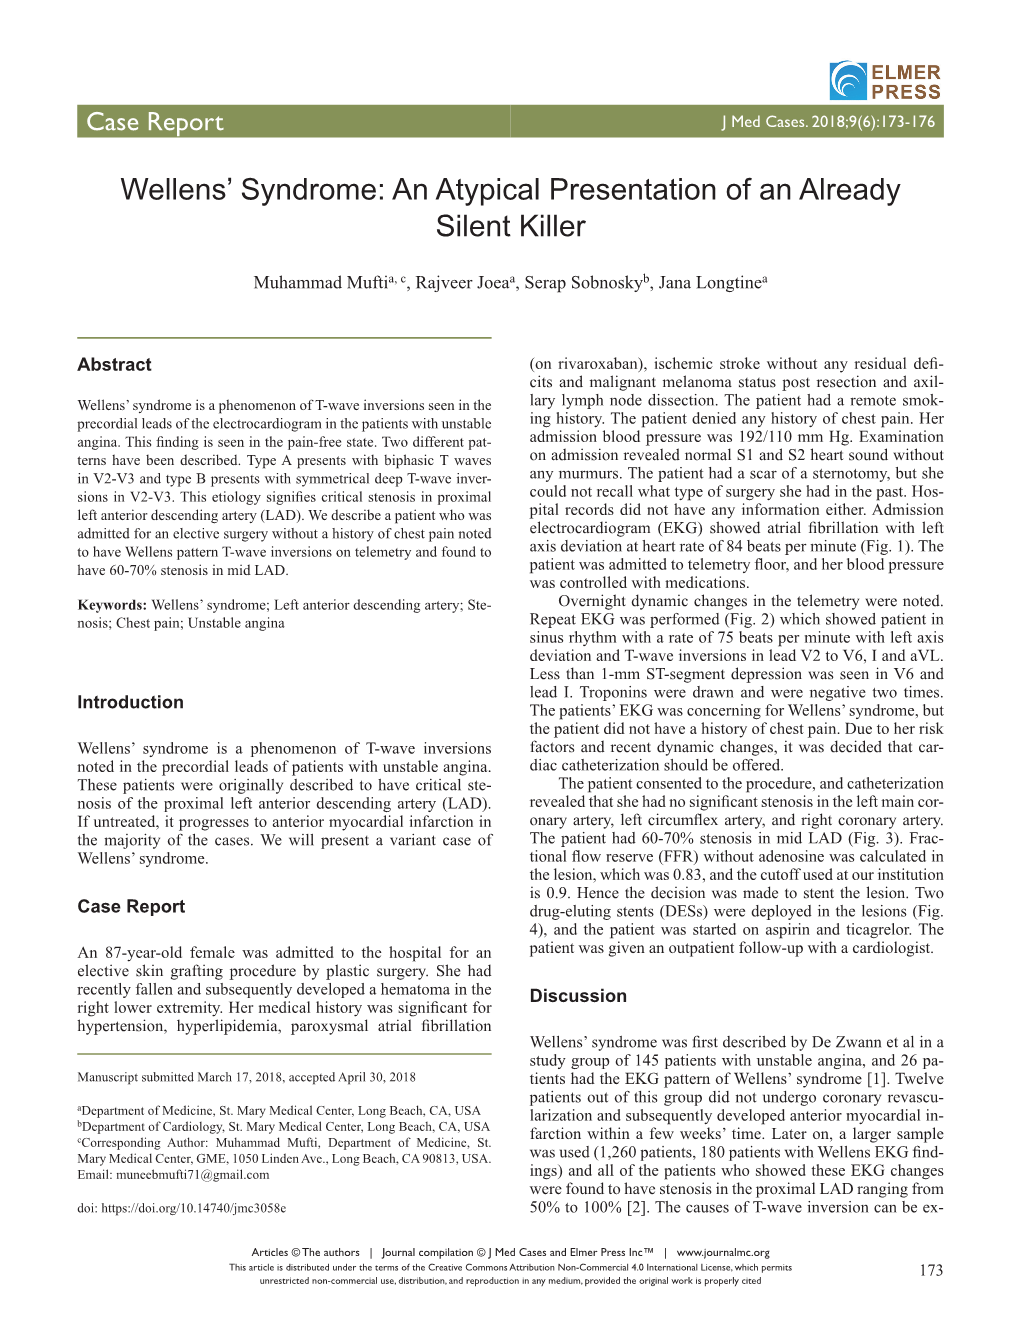 Wellens' Syndrome